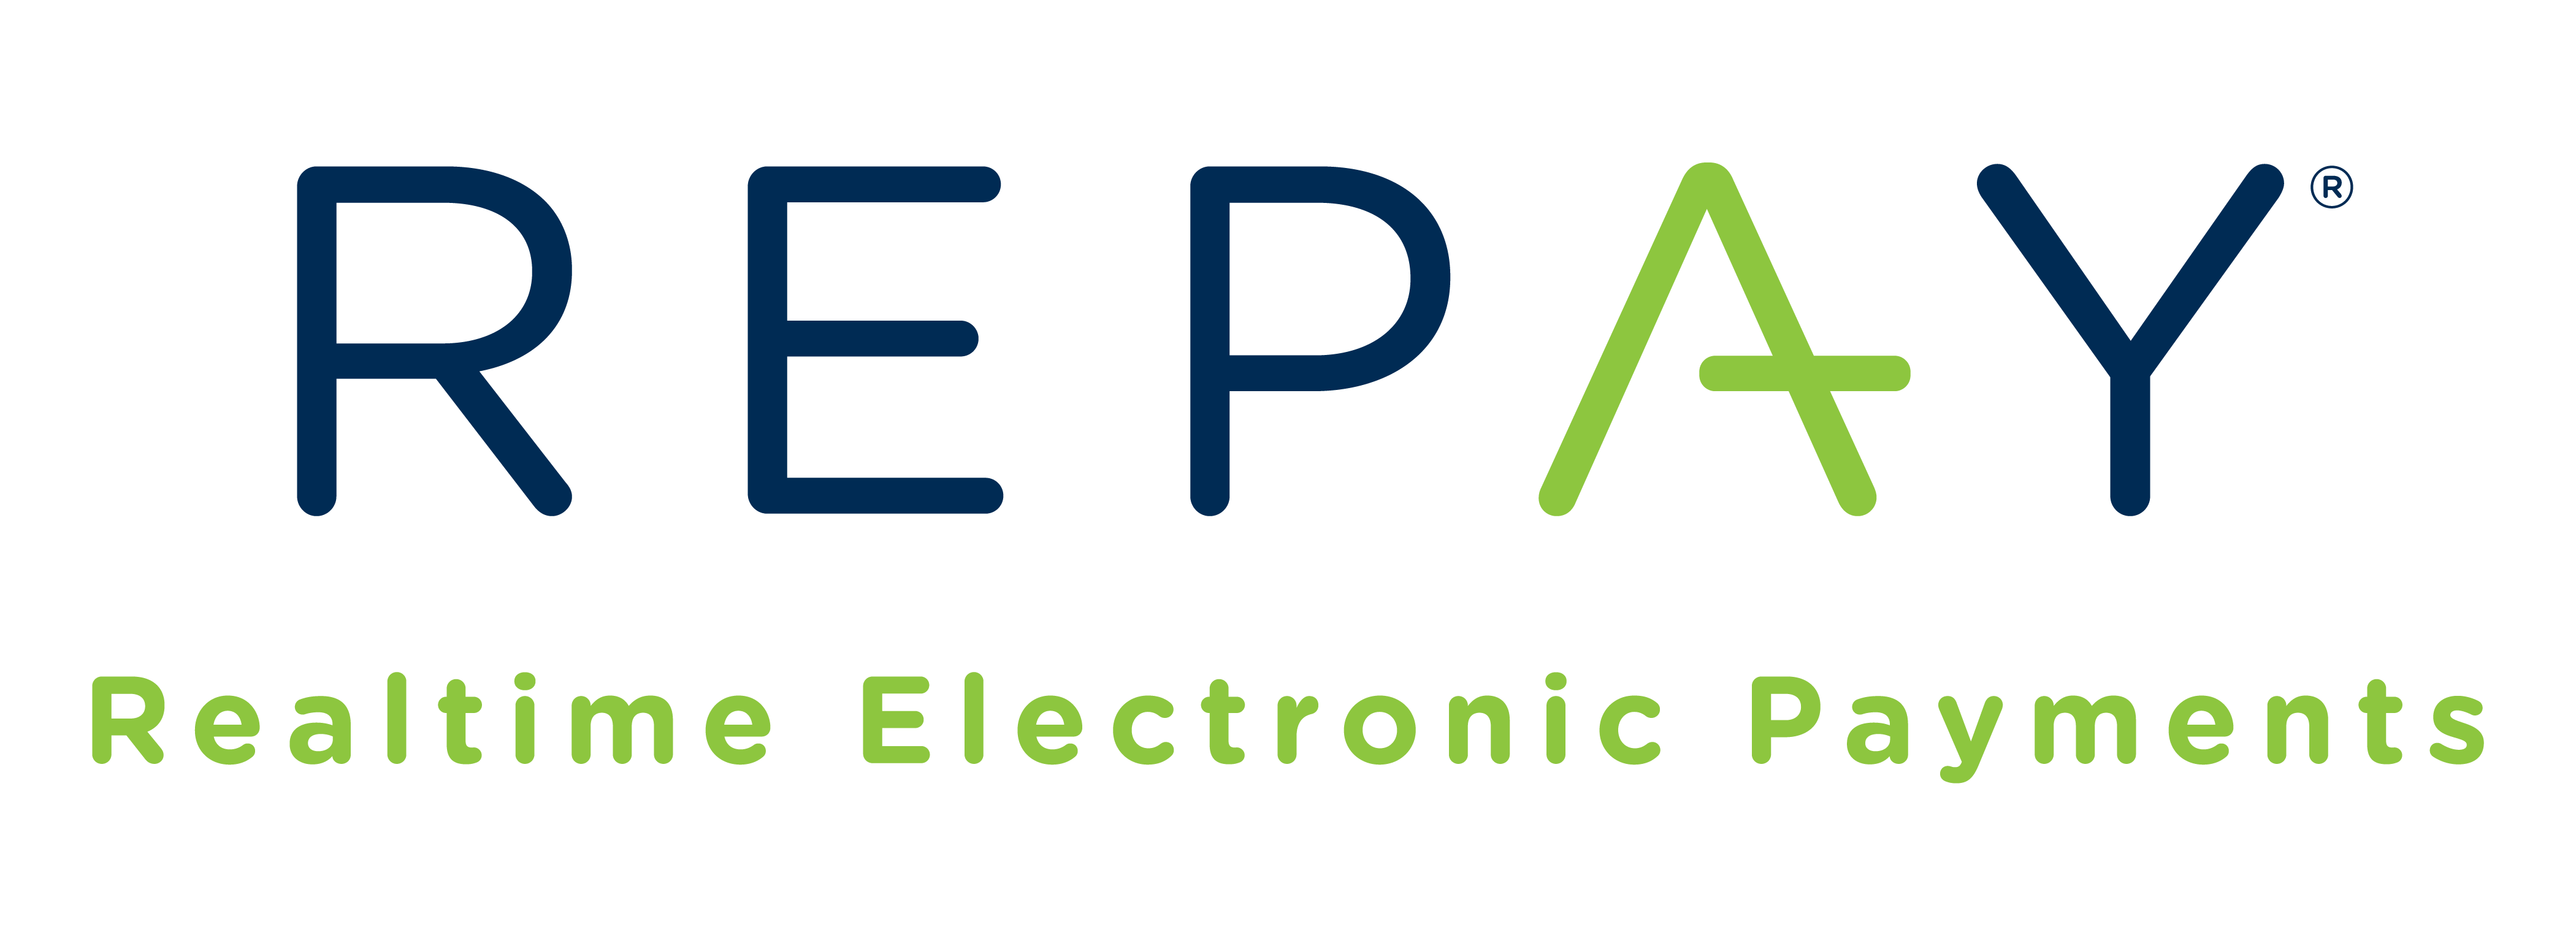 REPAY Realtime Electronic Payments